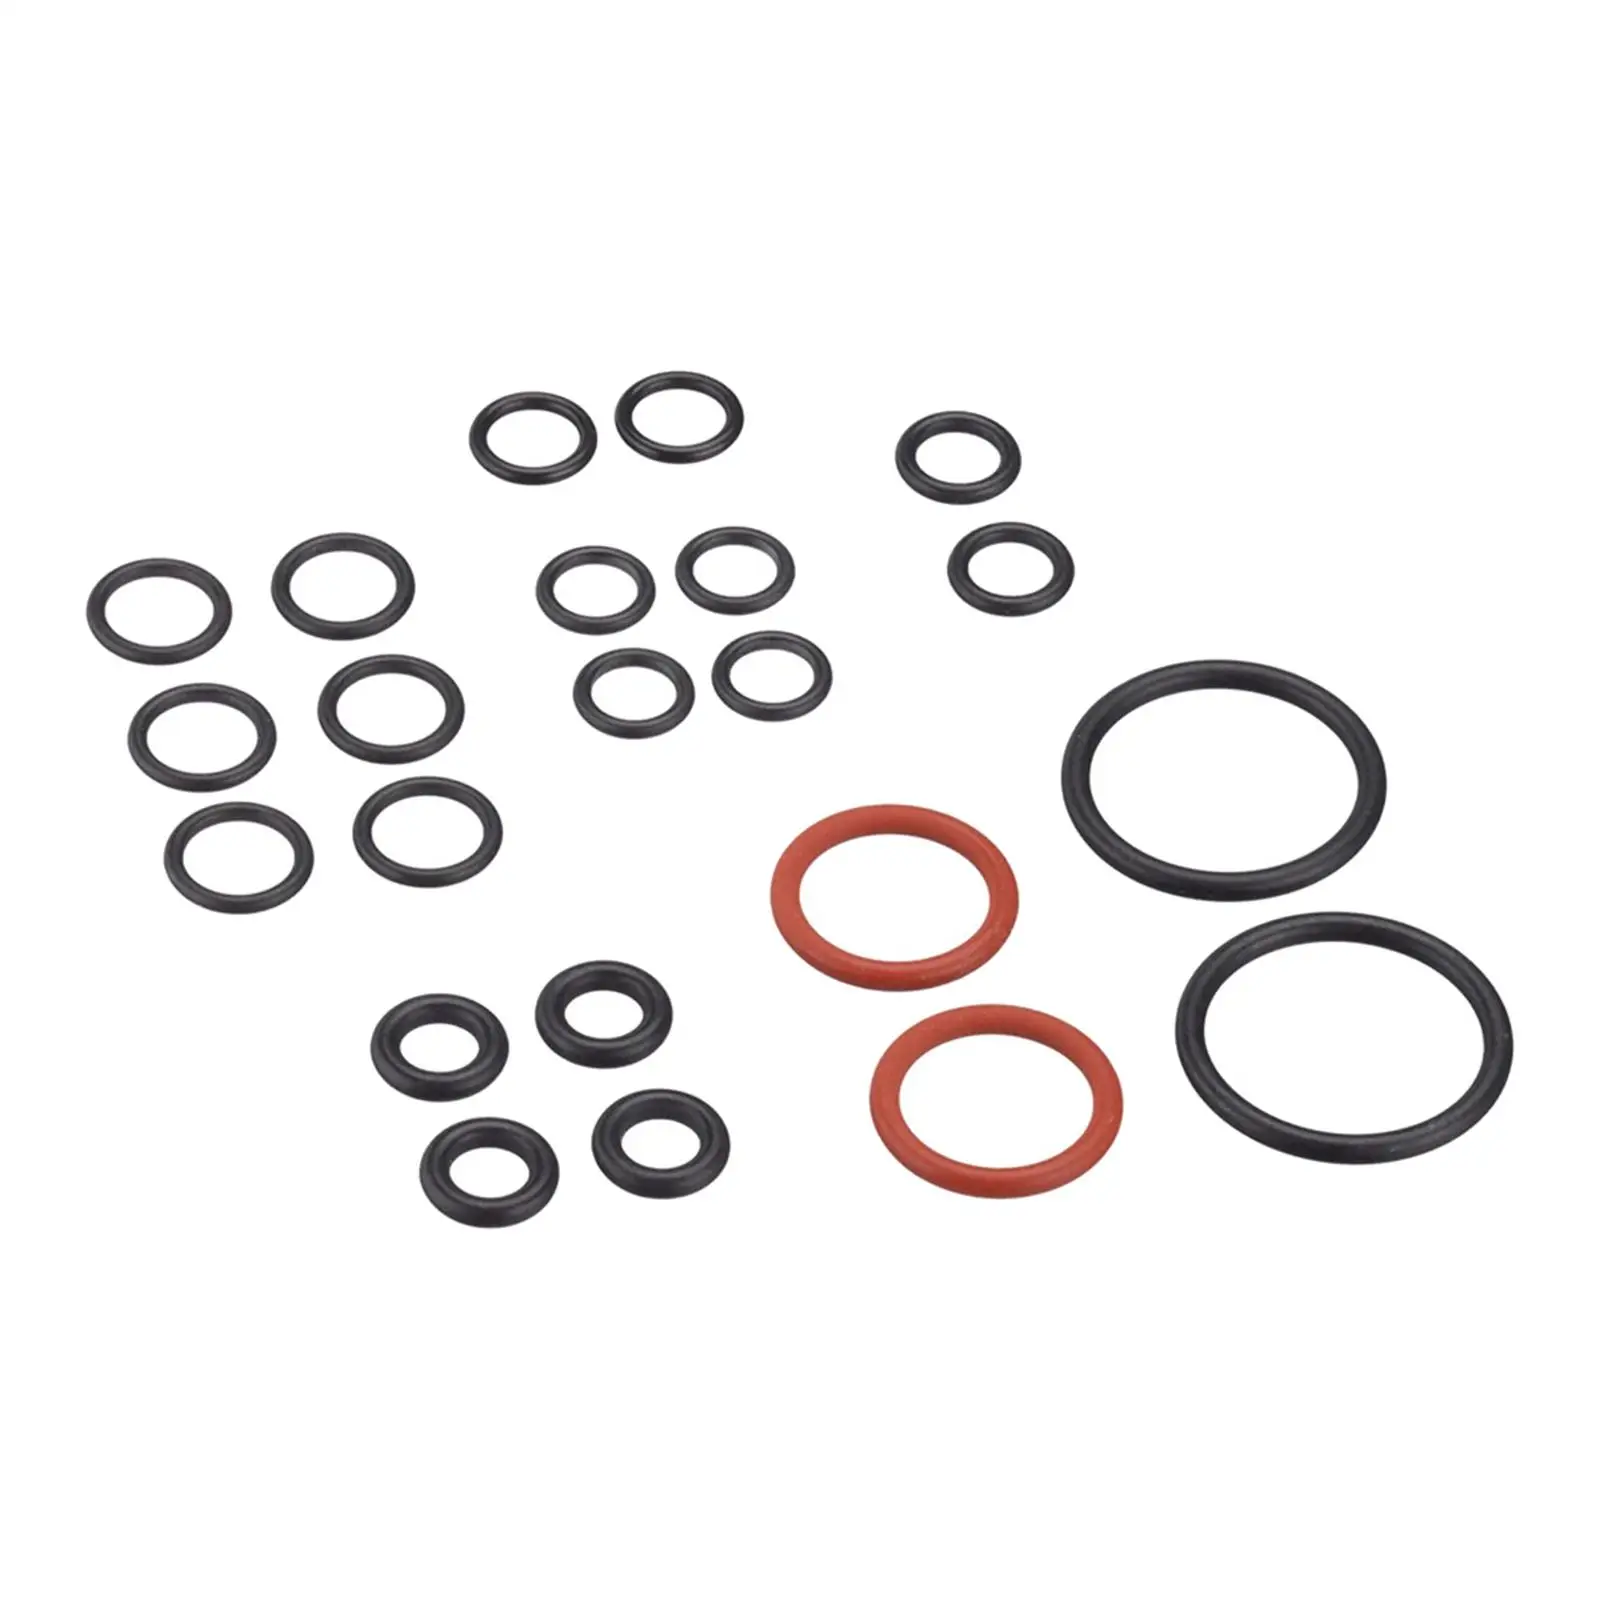 22 piece Sealing Rings Hose Nozzle Seals 2.884-312.0 Gasket Washers for 